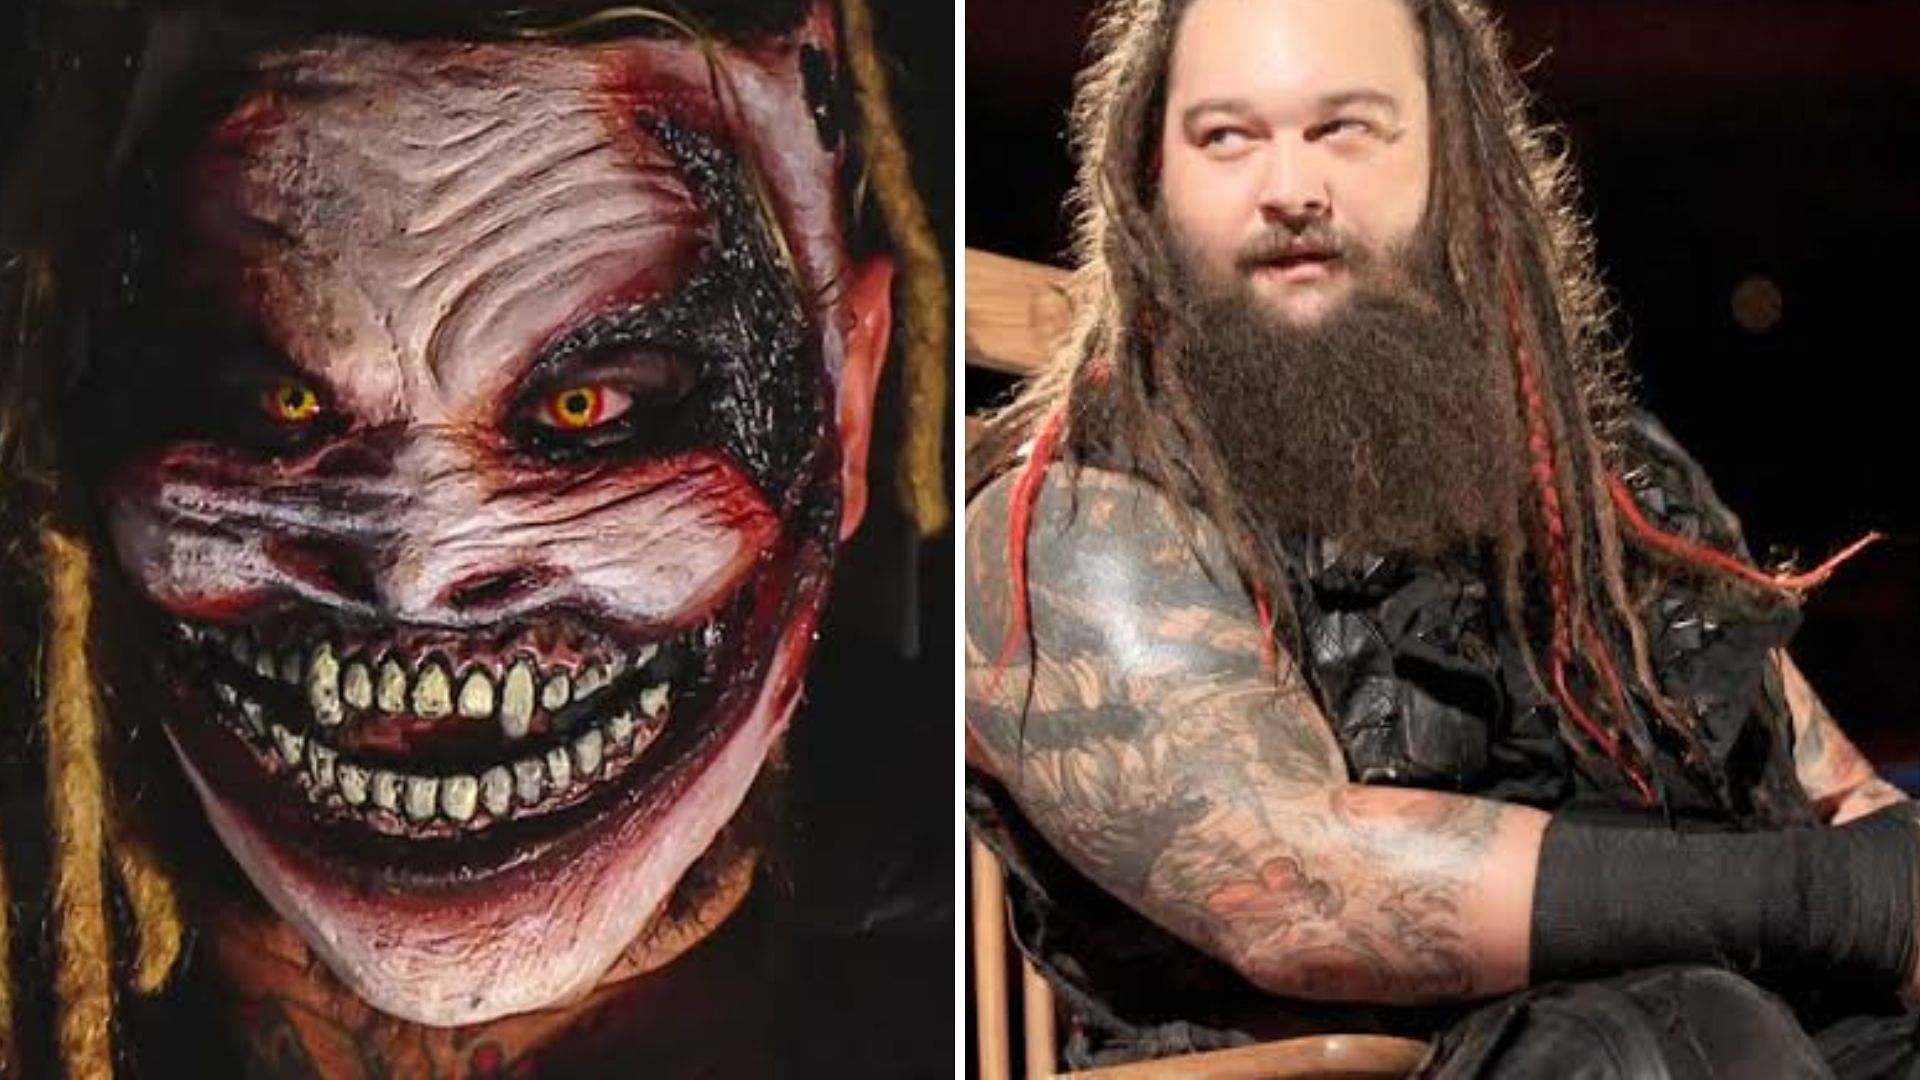 Bray Wyatt could be on his way back to WWE!